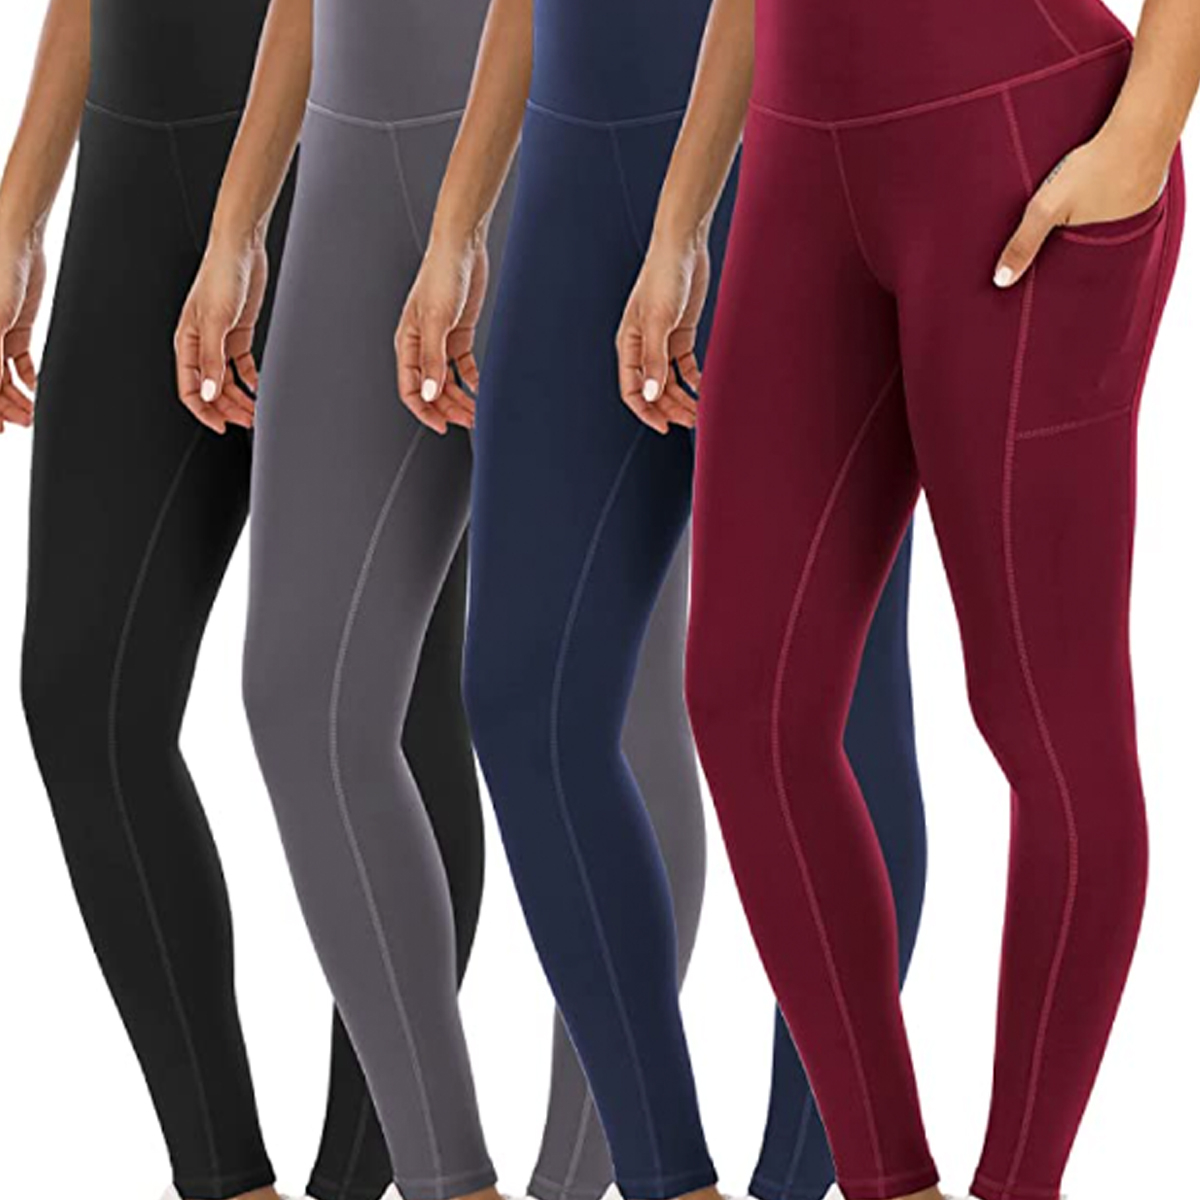 Get 4 Pairs of Top-Rated, Sweat-Wicking Leggings for $39 on Prime Day